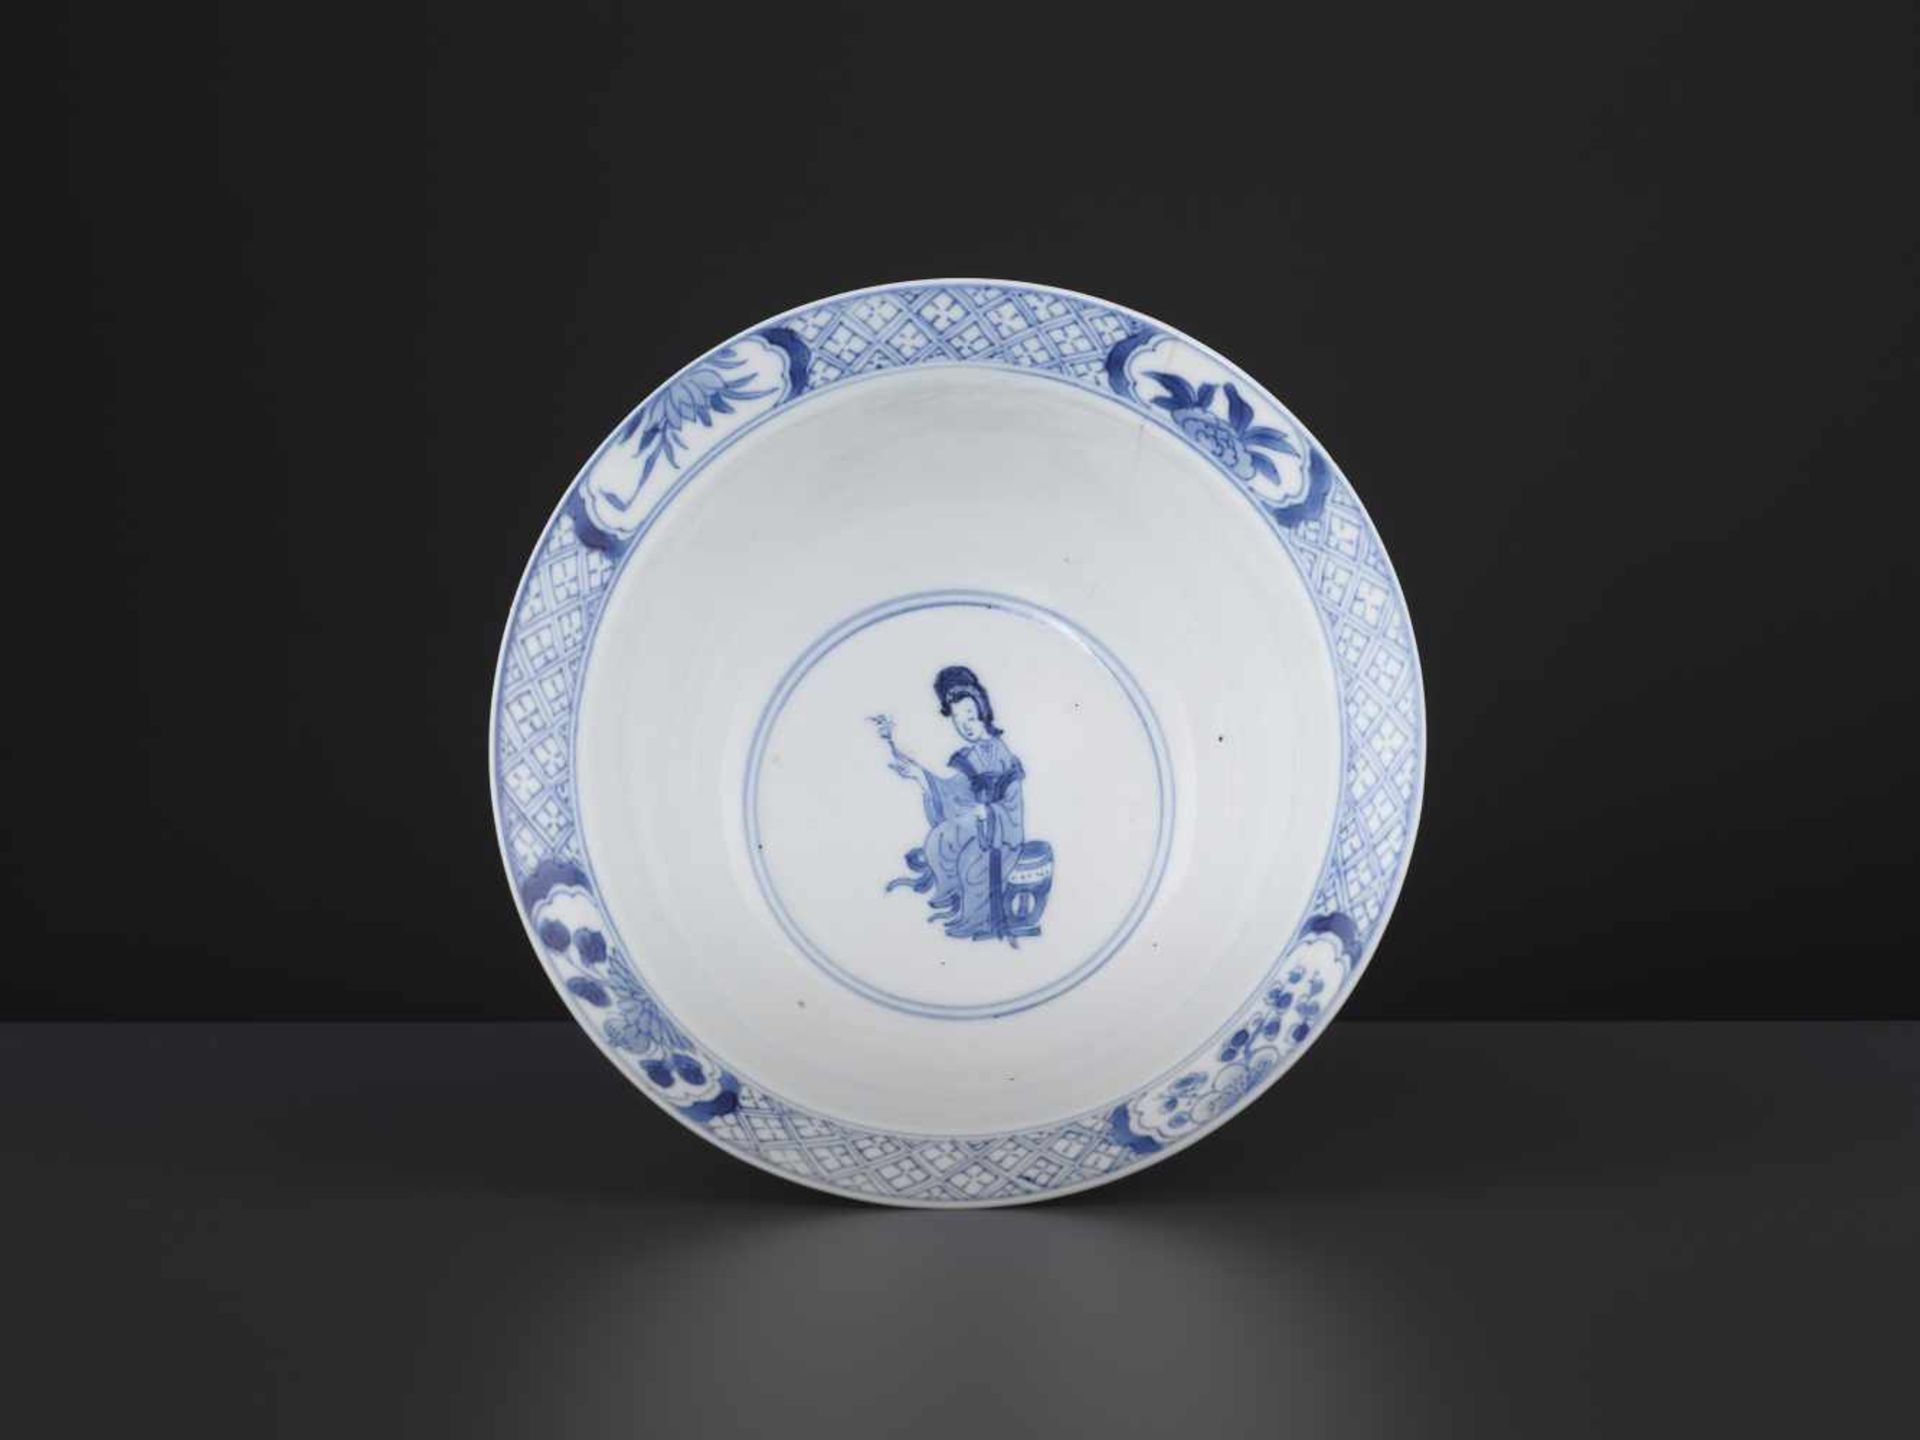 A KANGXI BLUE & WHITE KLAPMUTS BOWLChina, 1662-1722. Delicately painted with scenes from ‘Romance of - Image 6 of 8